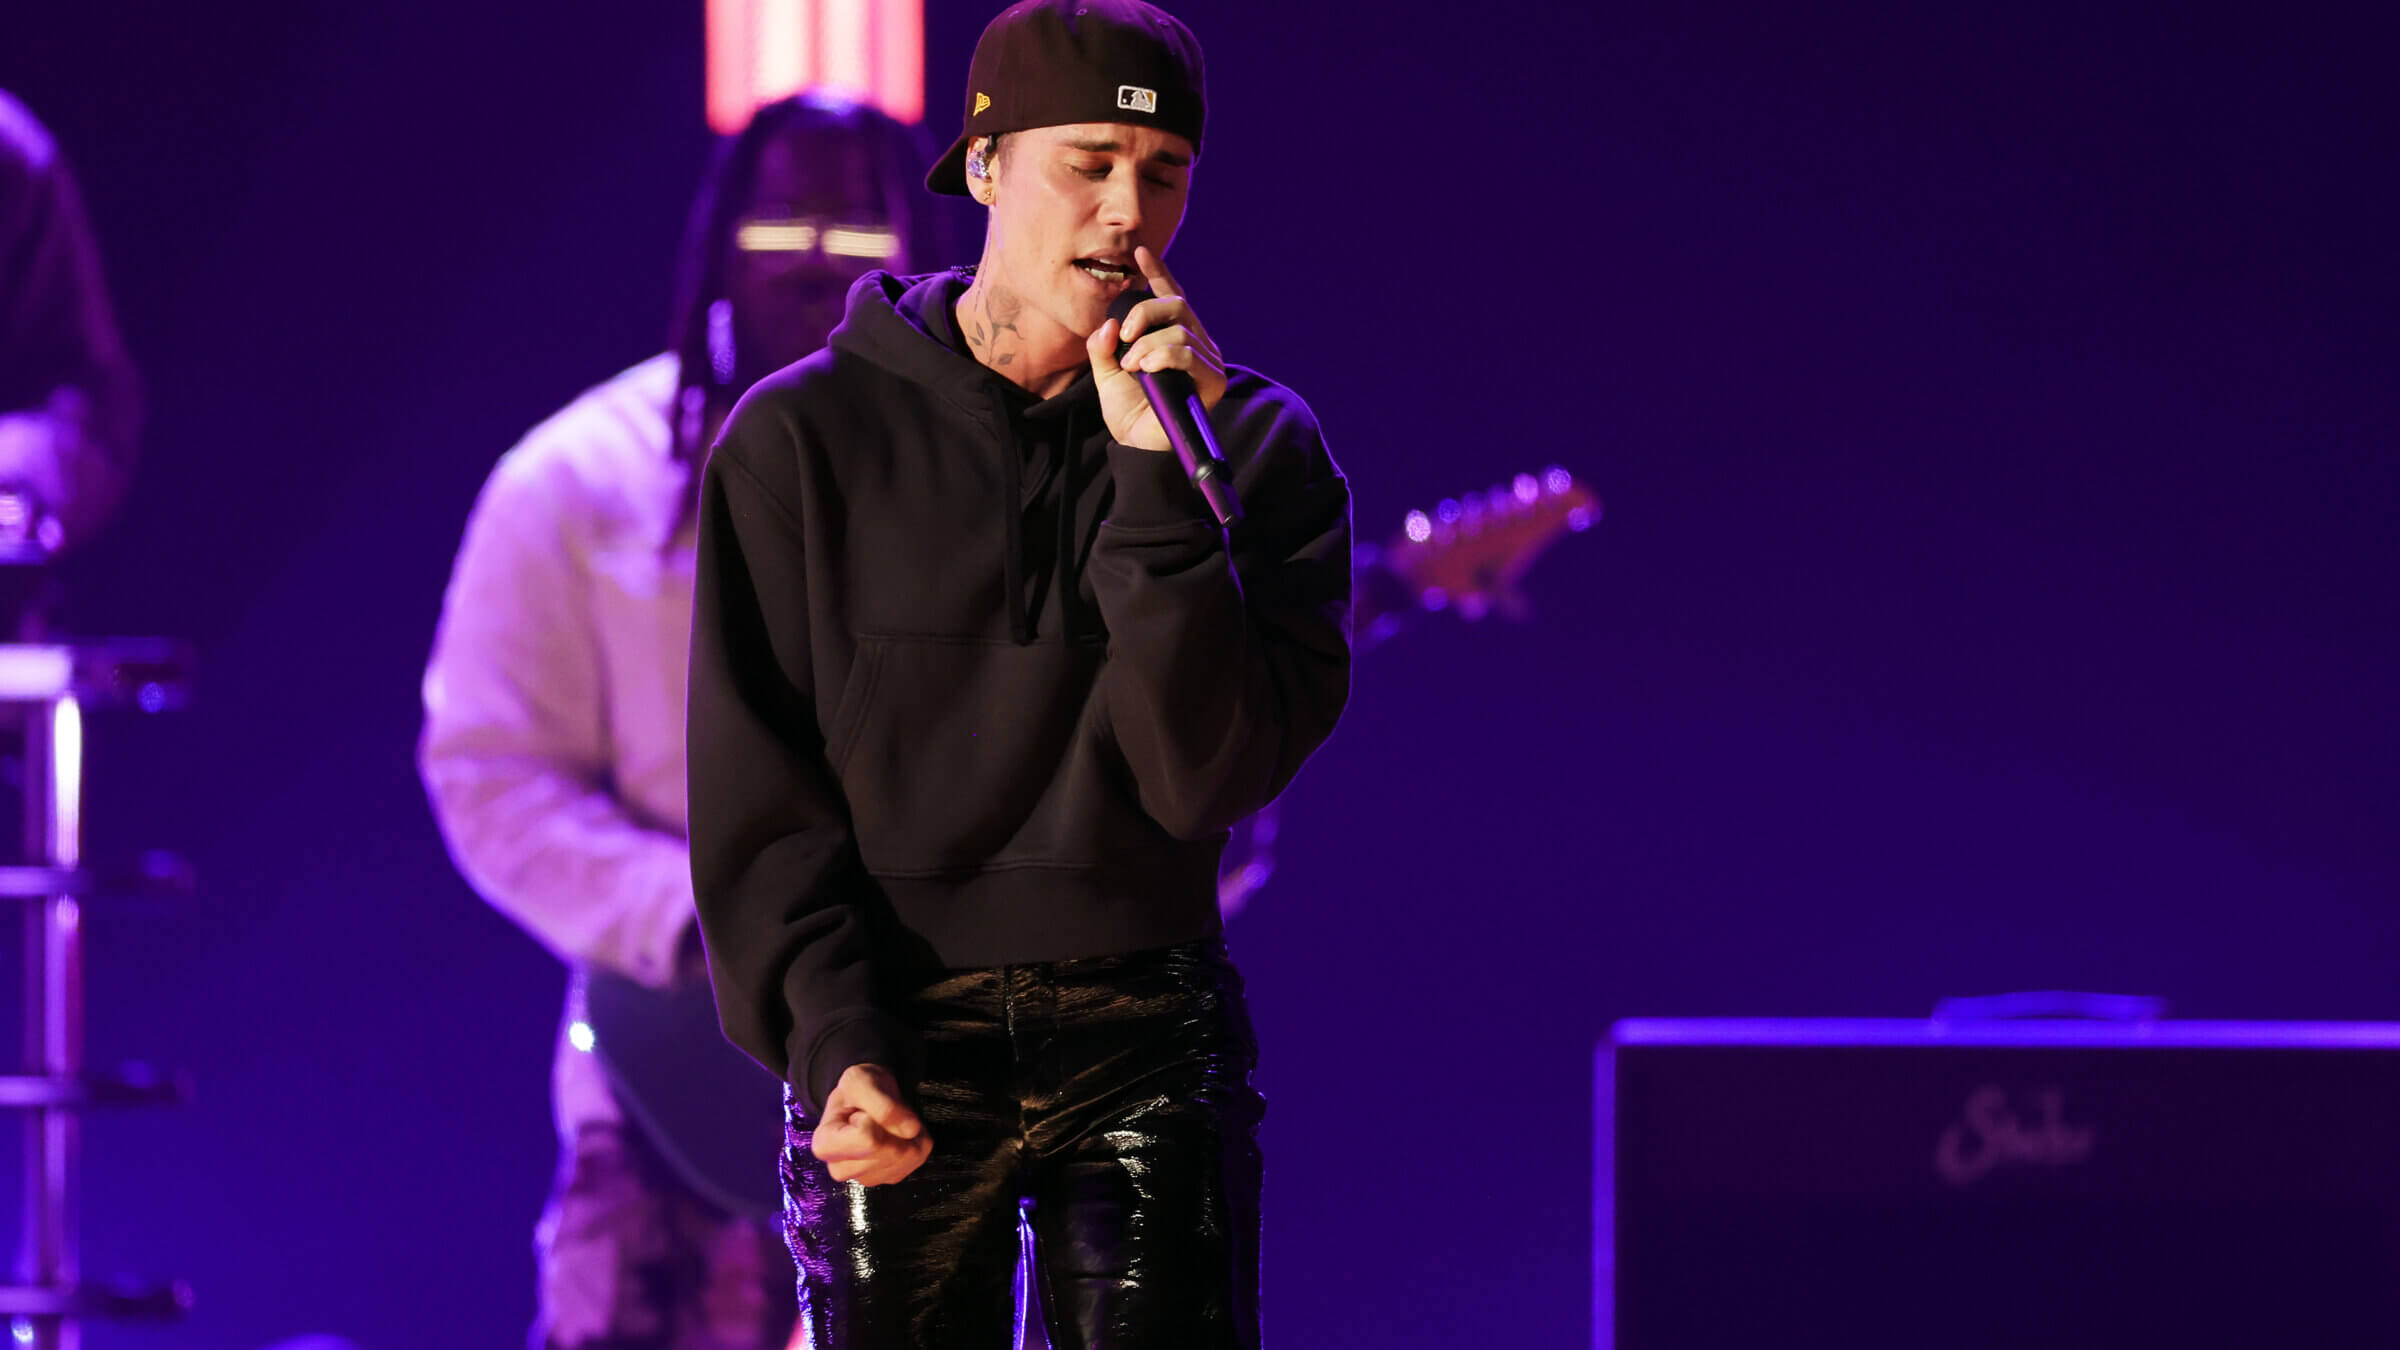 Justin Bieber performs at the Grammys